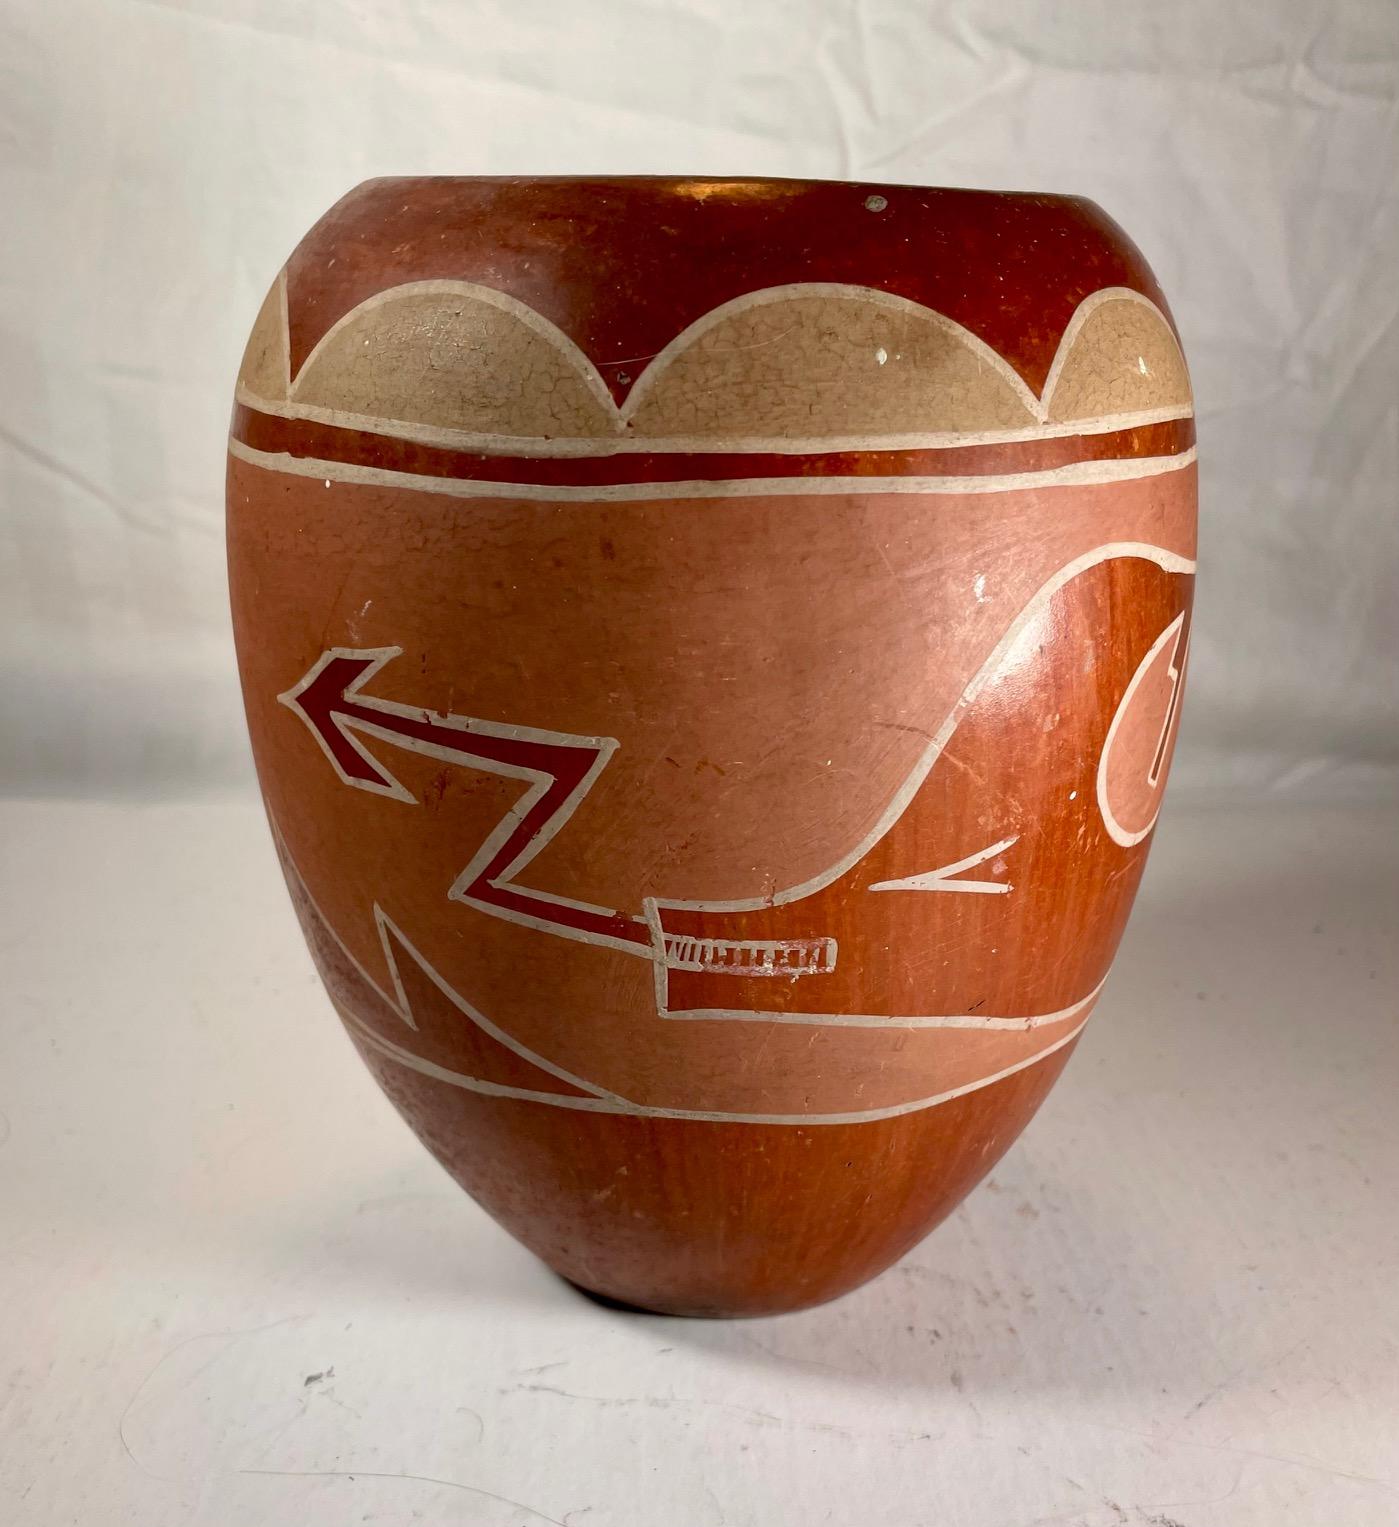 Large Vintage Hopi Pueblo Redware Pottery Jar Scraffito Avanyu Design.

Intricately etched and fully polished red large Hopi - San Ildefonso pottery jar. The water serpent (Avanyu) scraffito decorates the circumference in a buff and beige slip